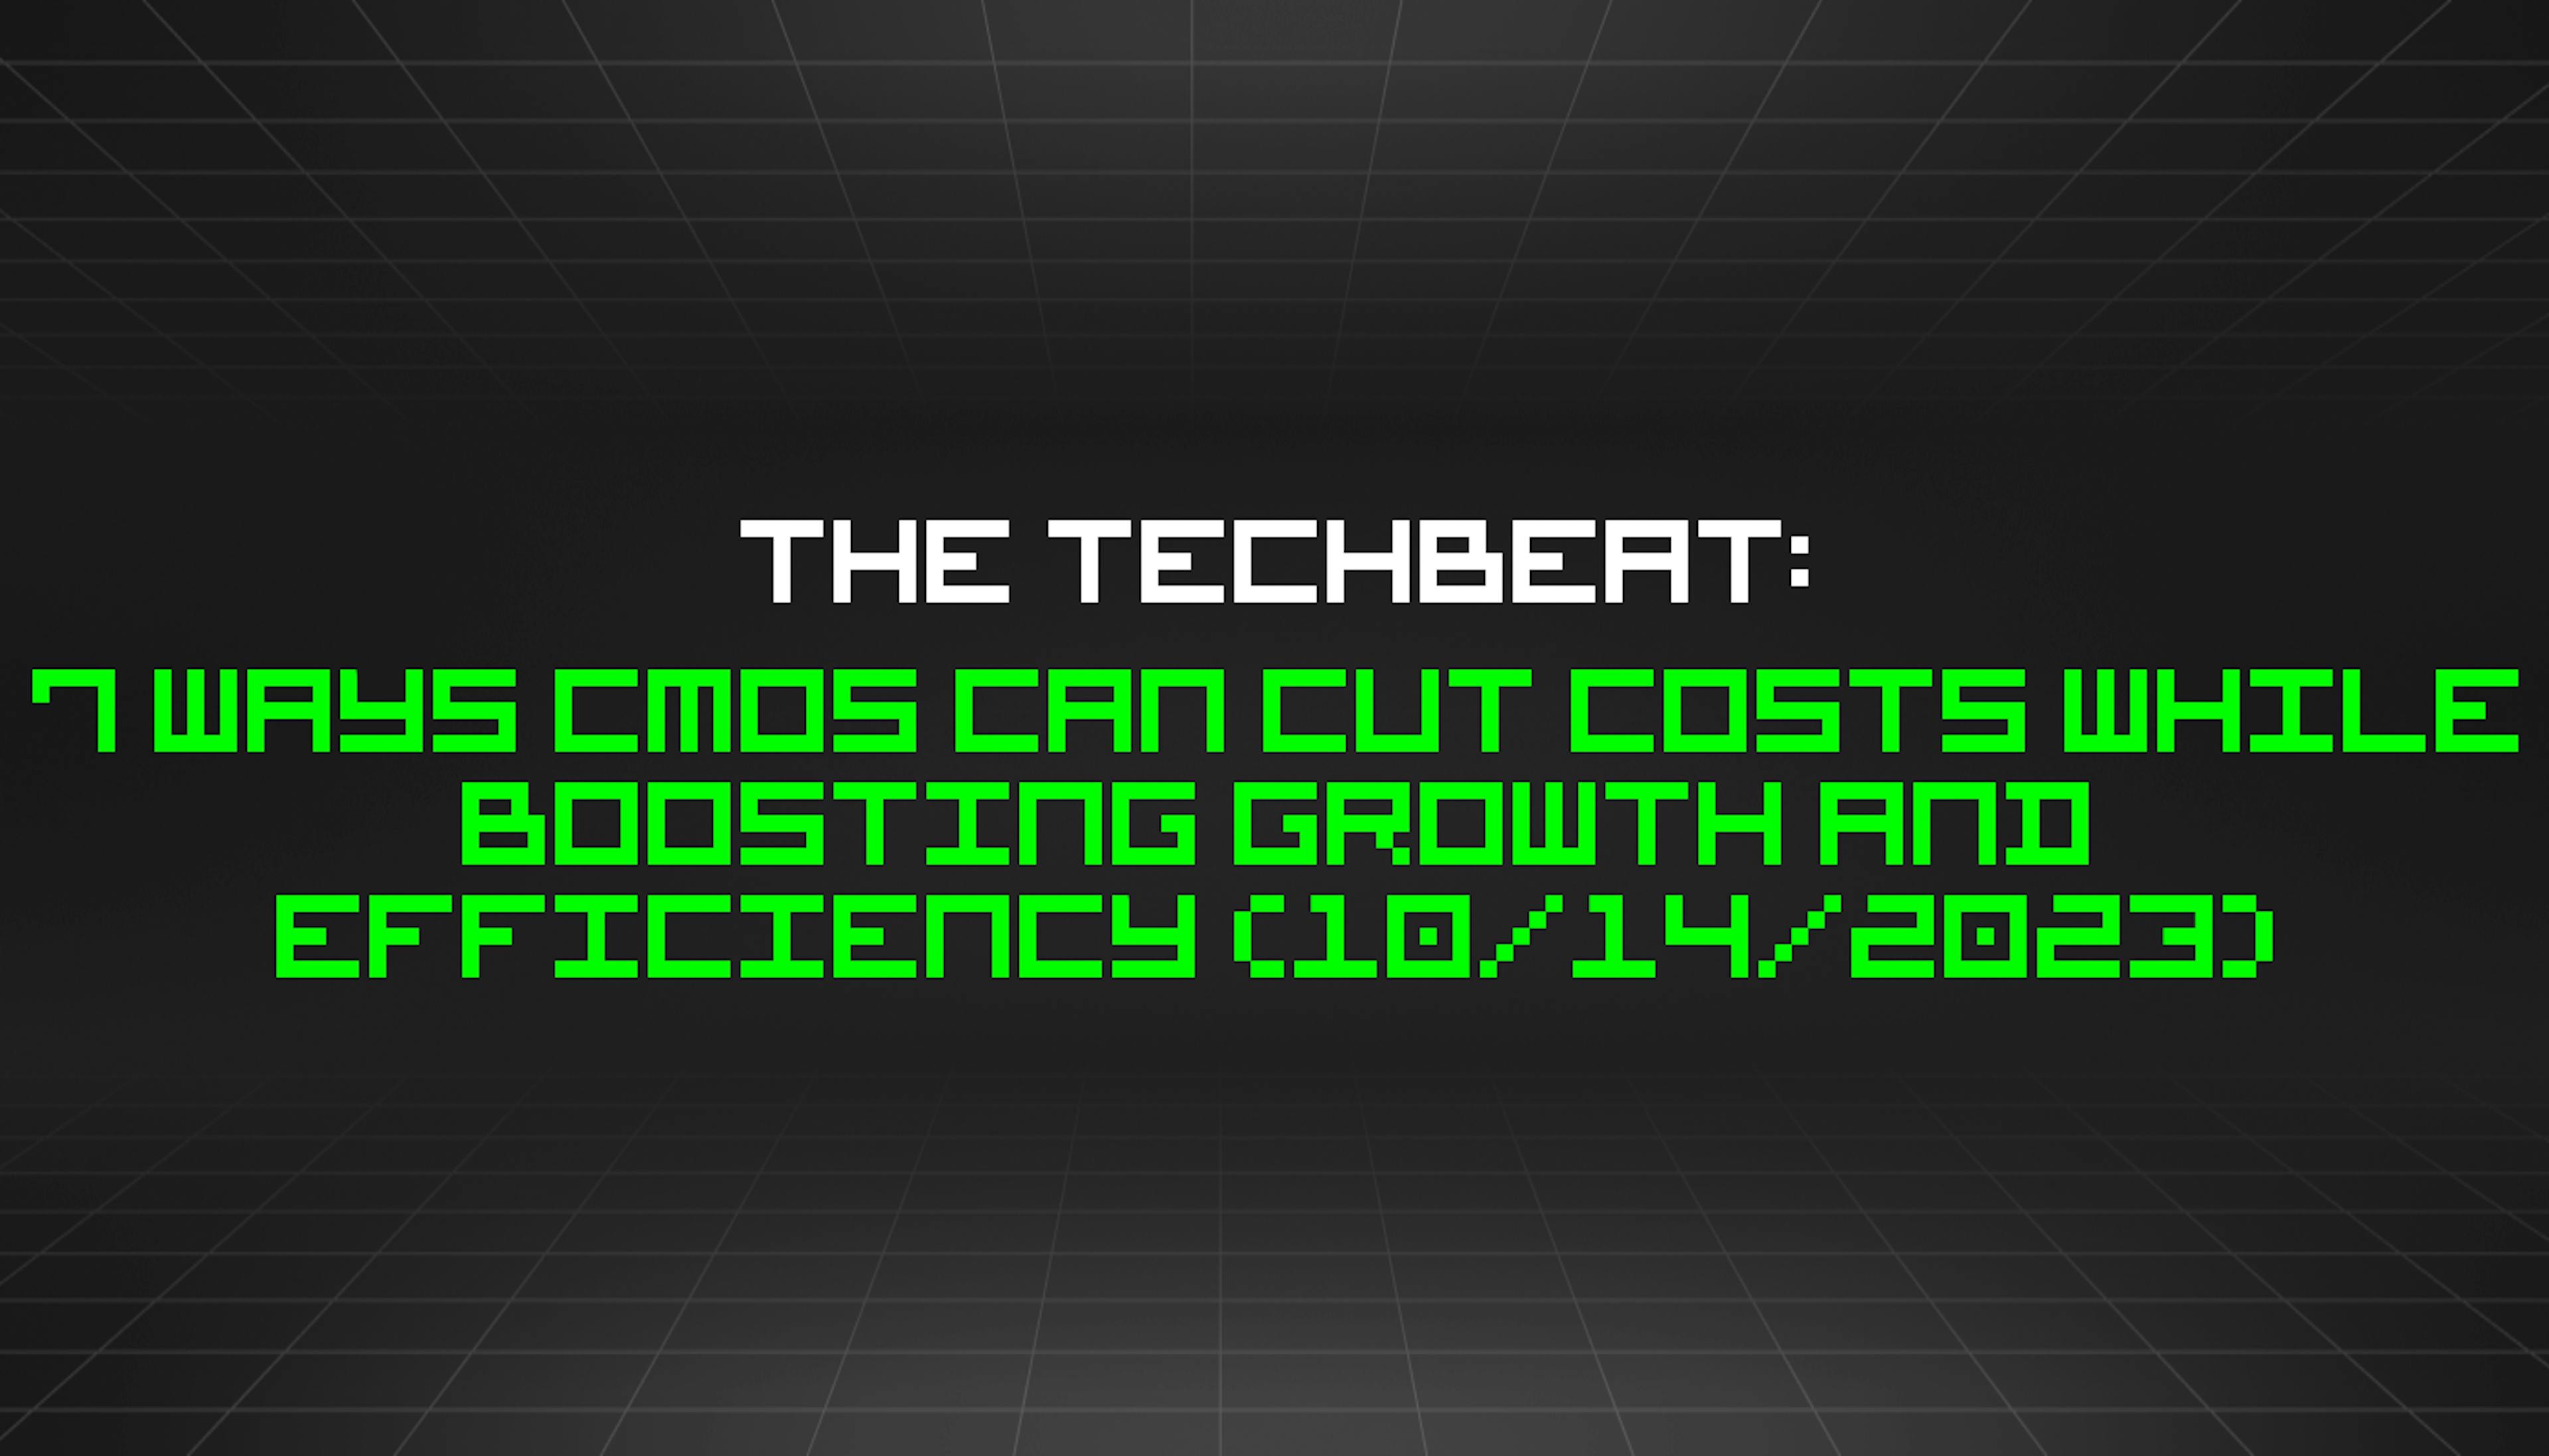 featured image - The TechBeat: 7 Ways CMOs Can Cut Costs While Boosting Growth and Efficiency (10/14/2023)